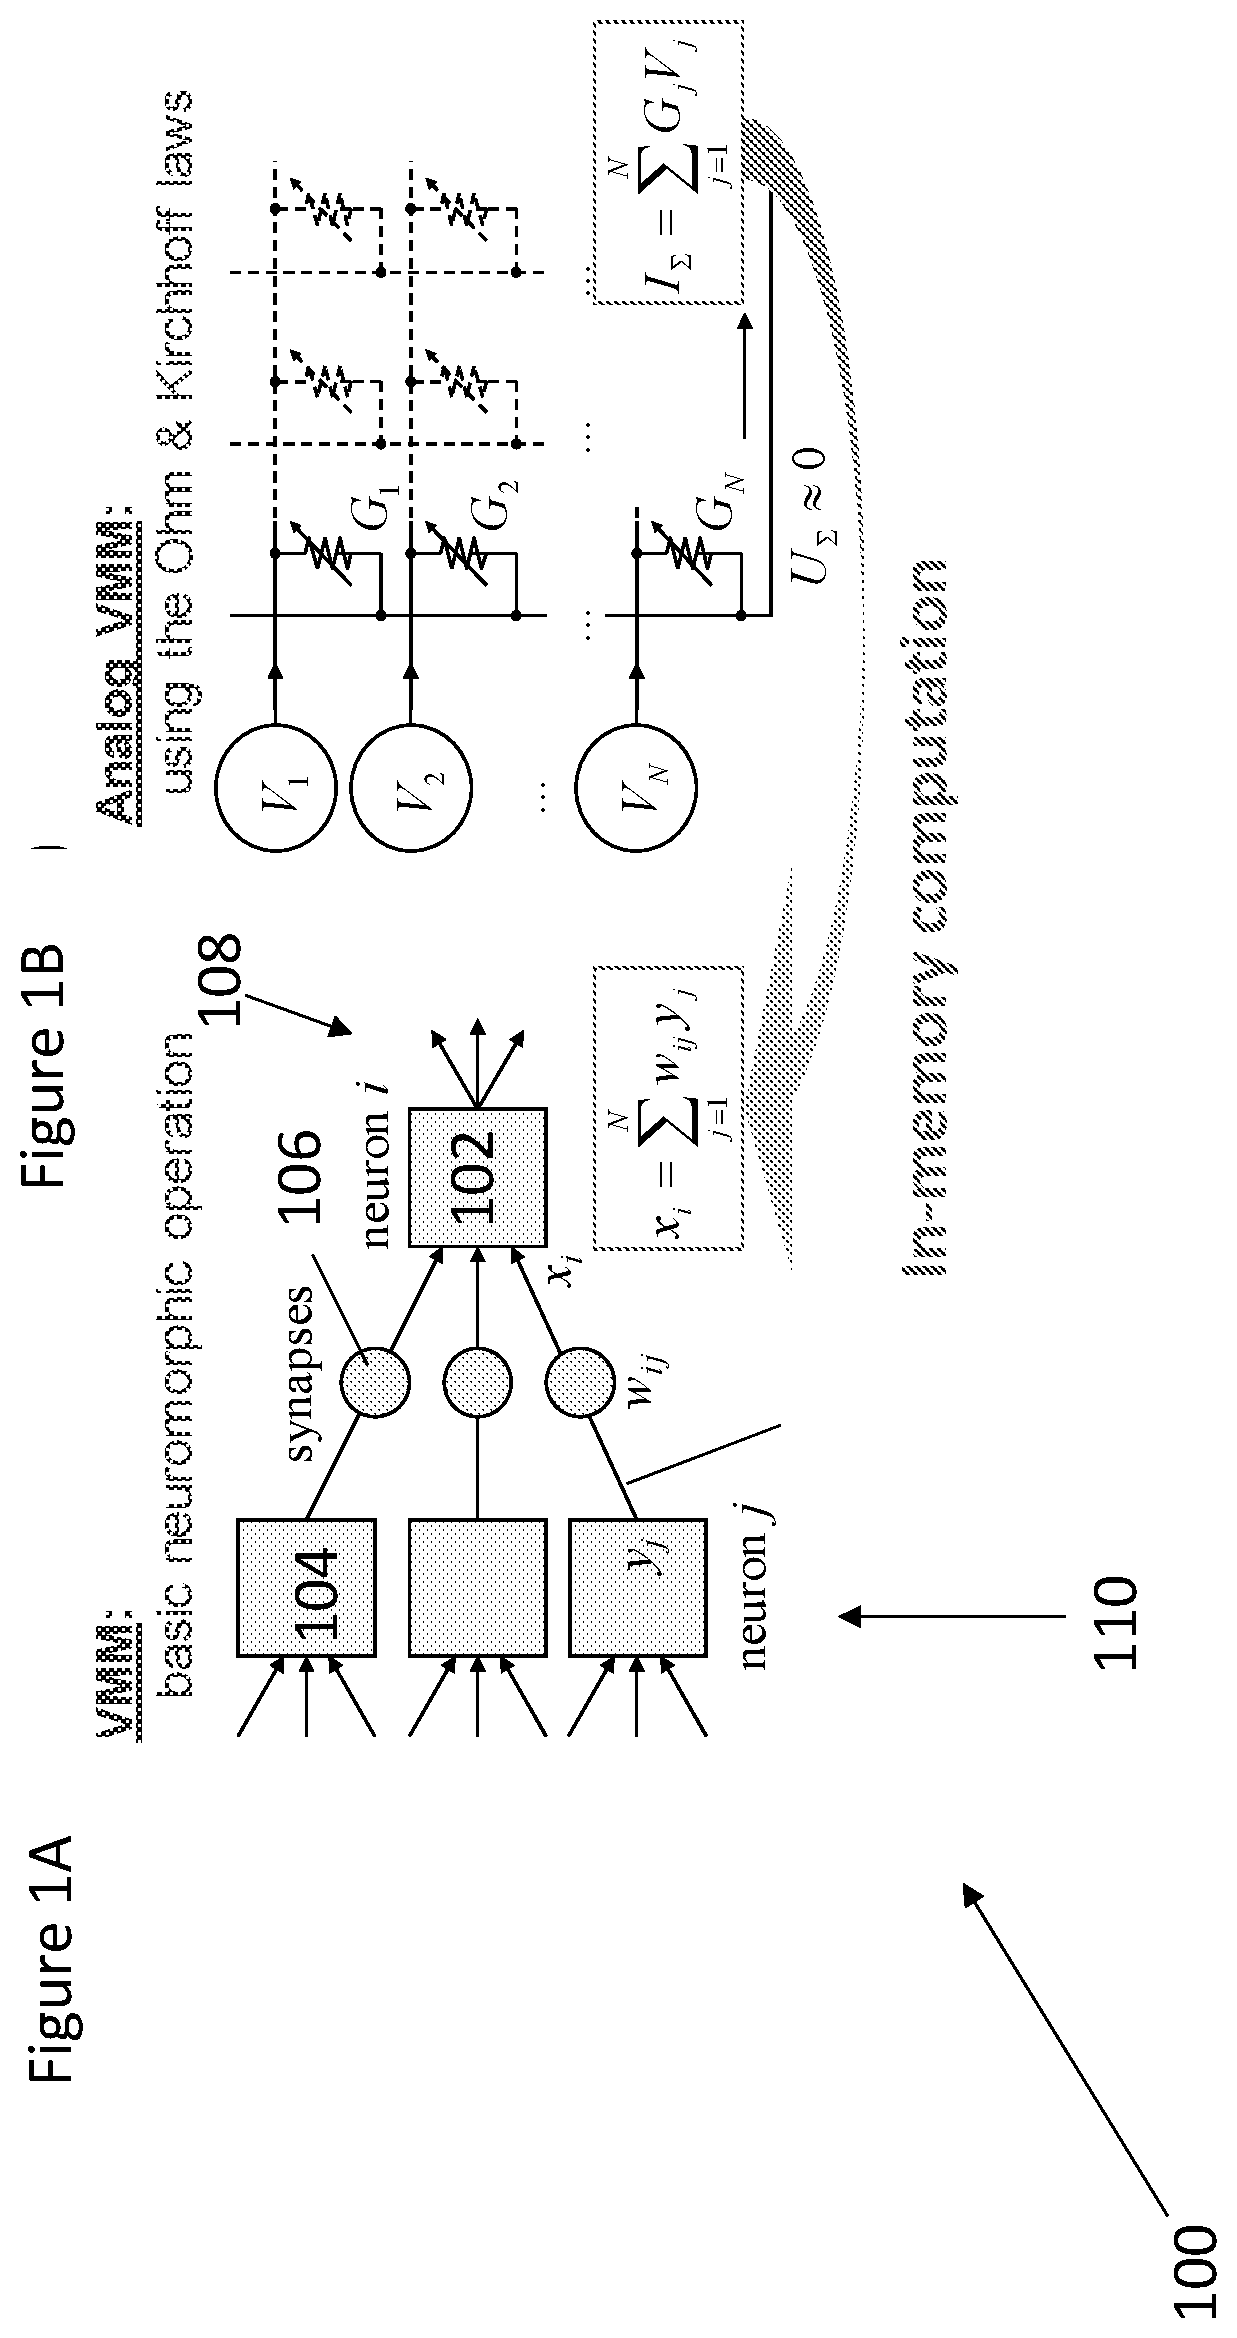 Mixed signal neuromorphic computing with nonvolatile memory devices